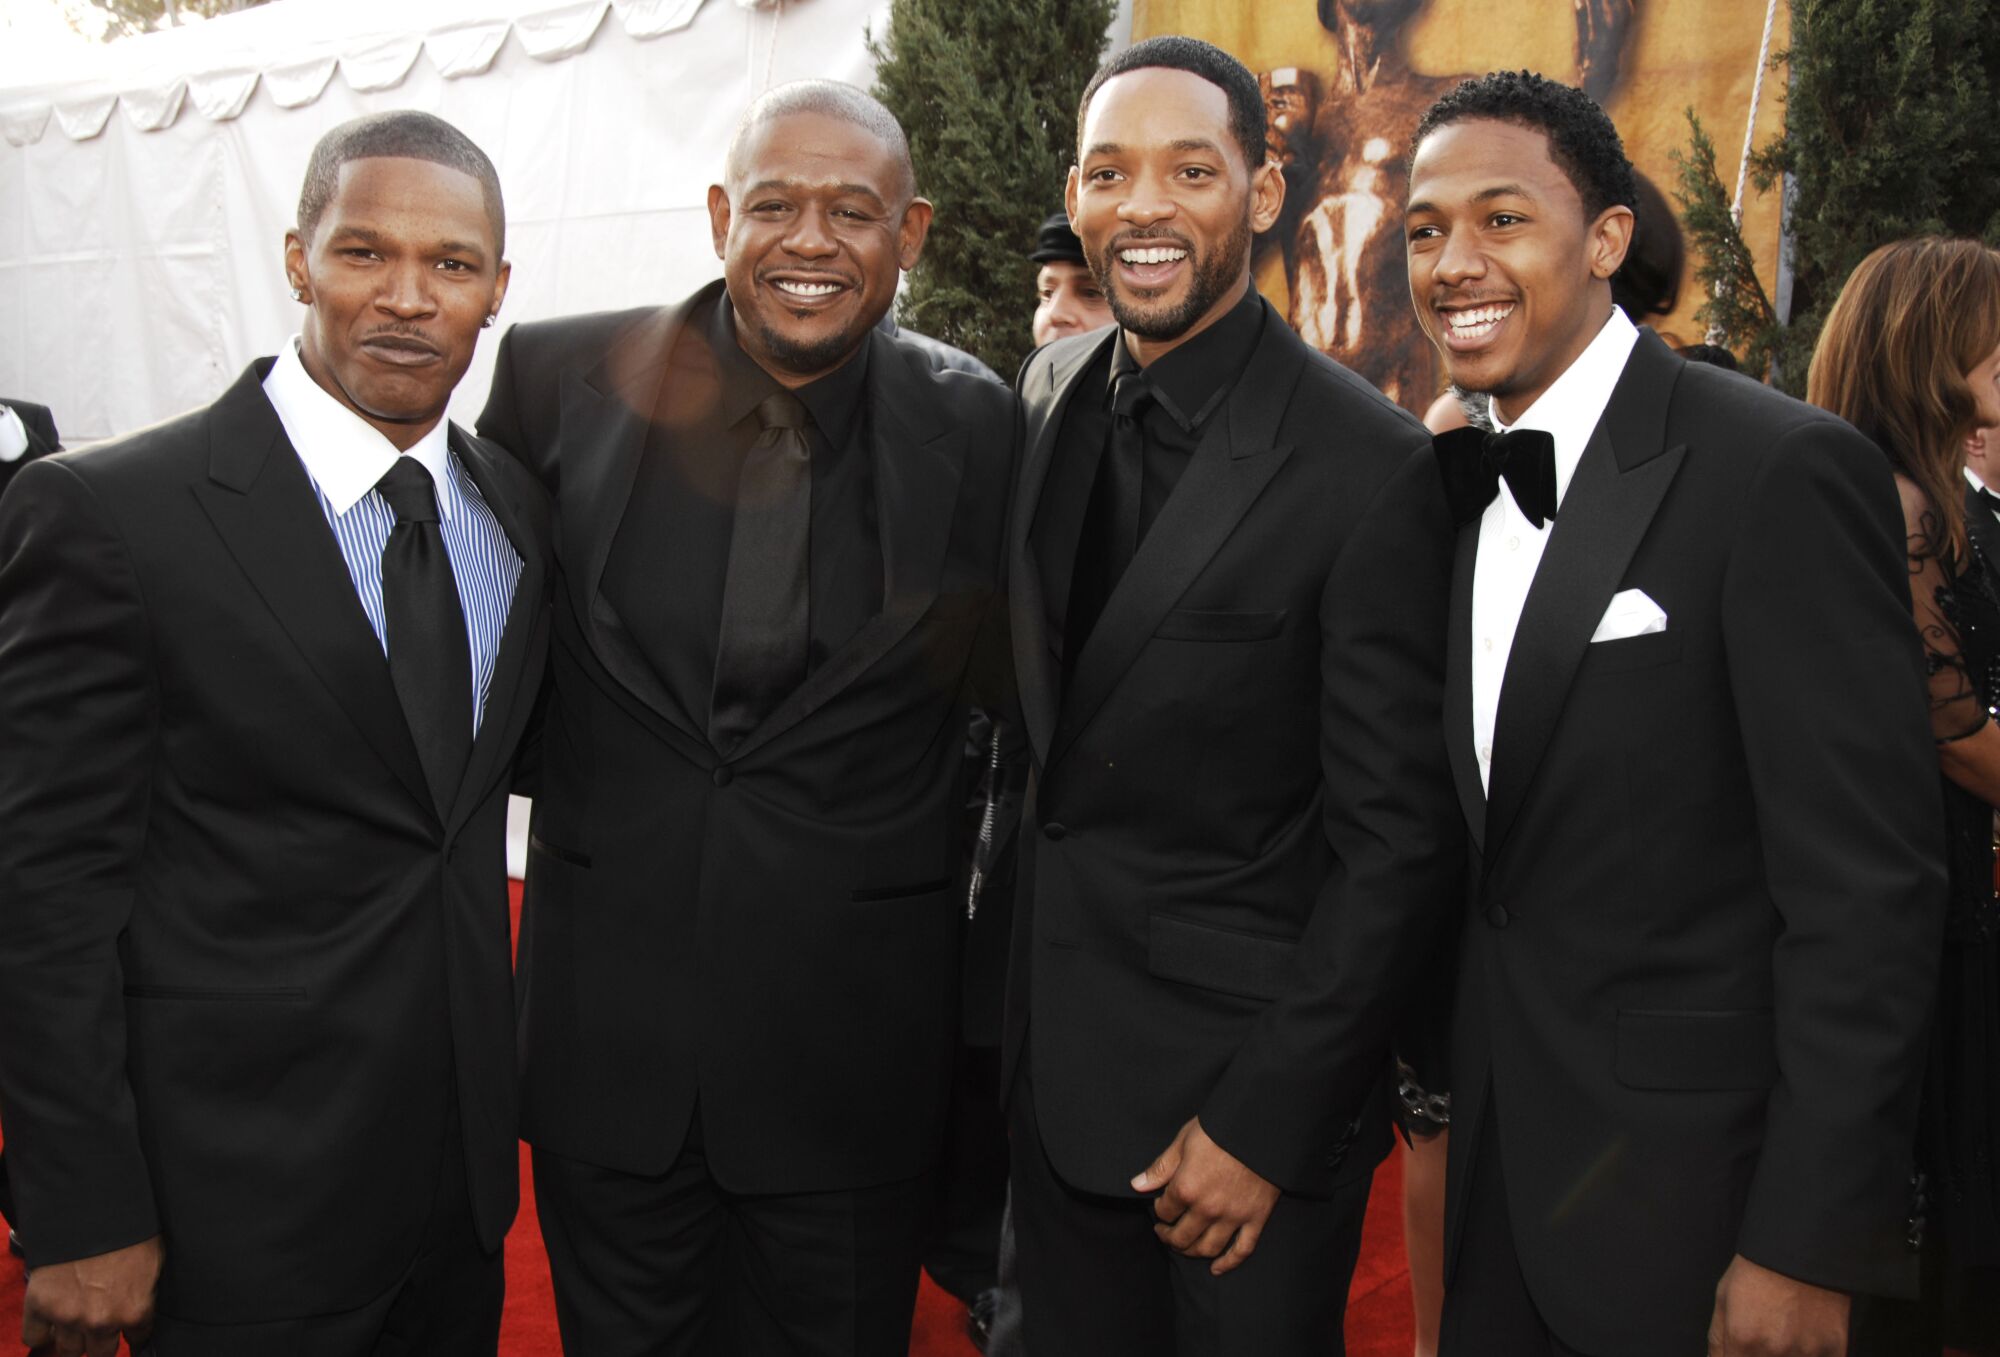 Four men outfitted in suits and tuxedos pose on the red carpet at an award show